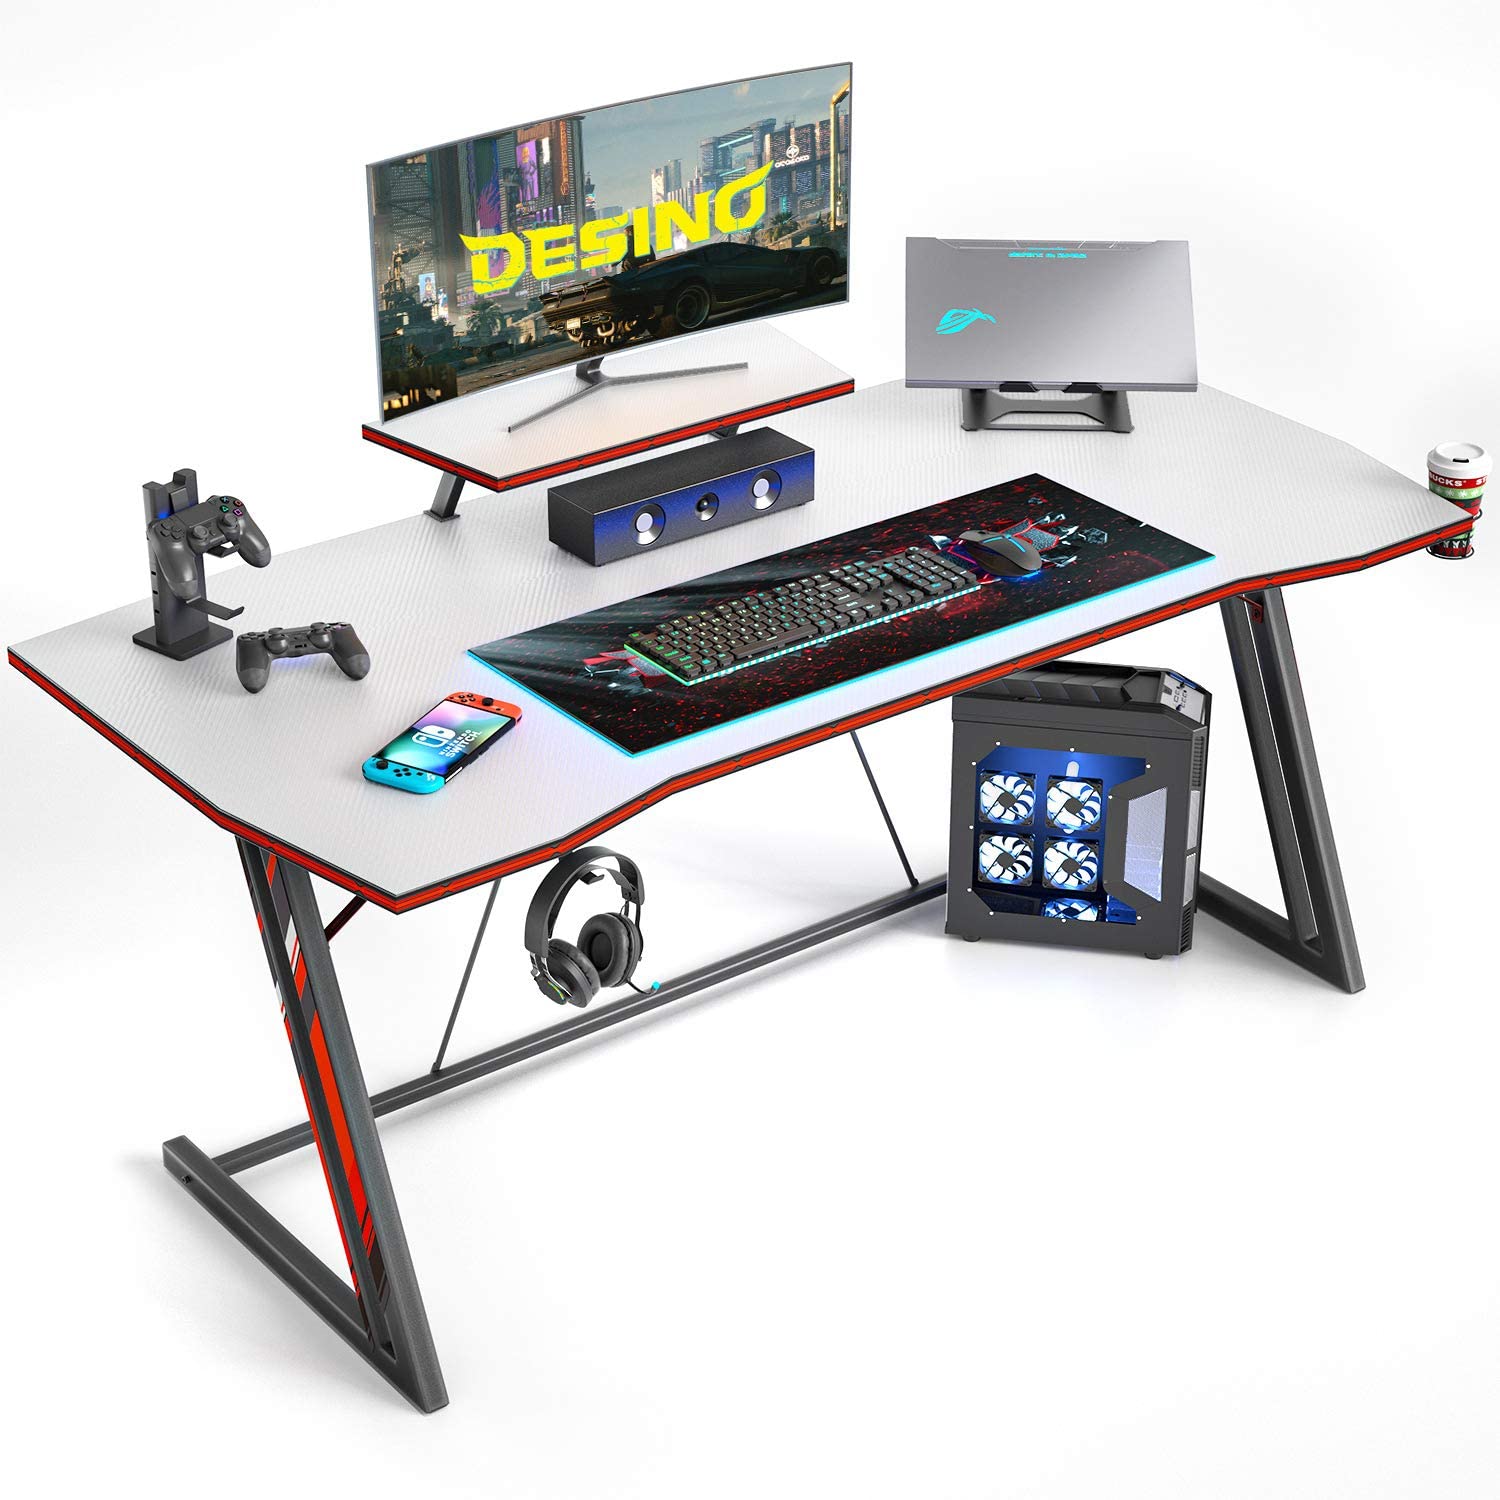 Designa Computer Desk Racing Style, 47 inch Gaming Desk, Writing Home Office Desk with Free Mouse Pad, USB Handle Rack, Cup Hold